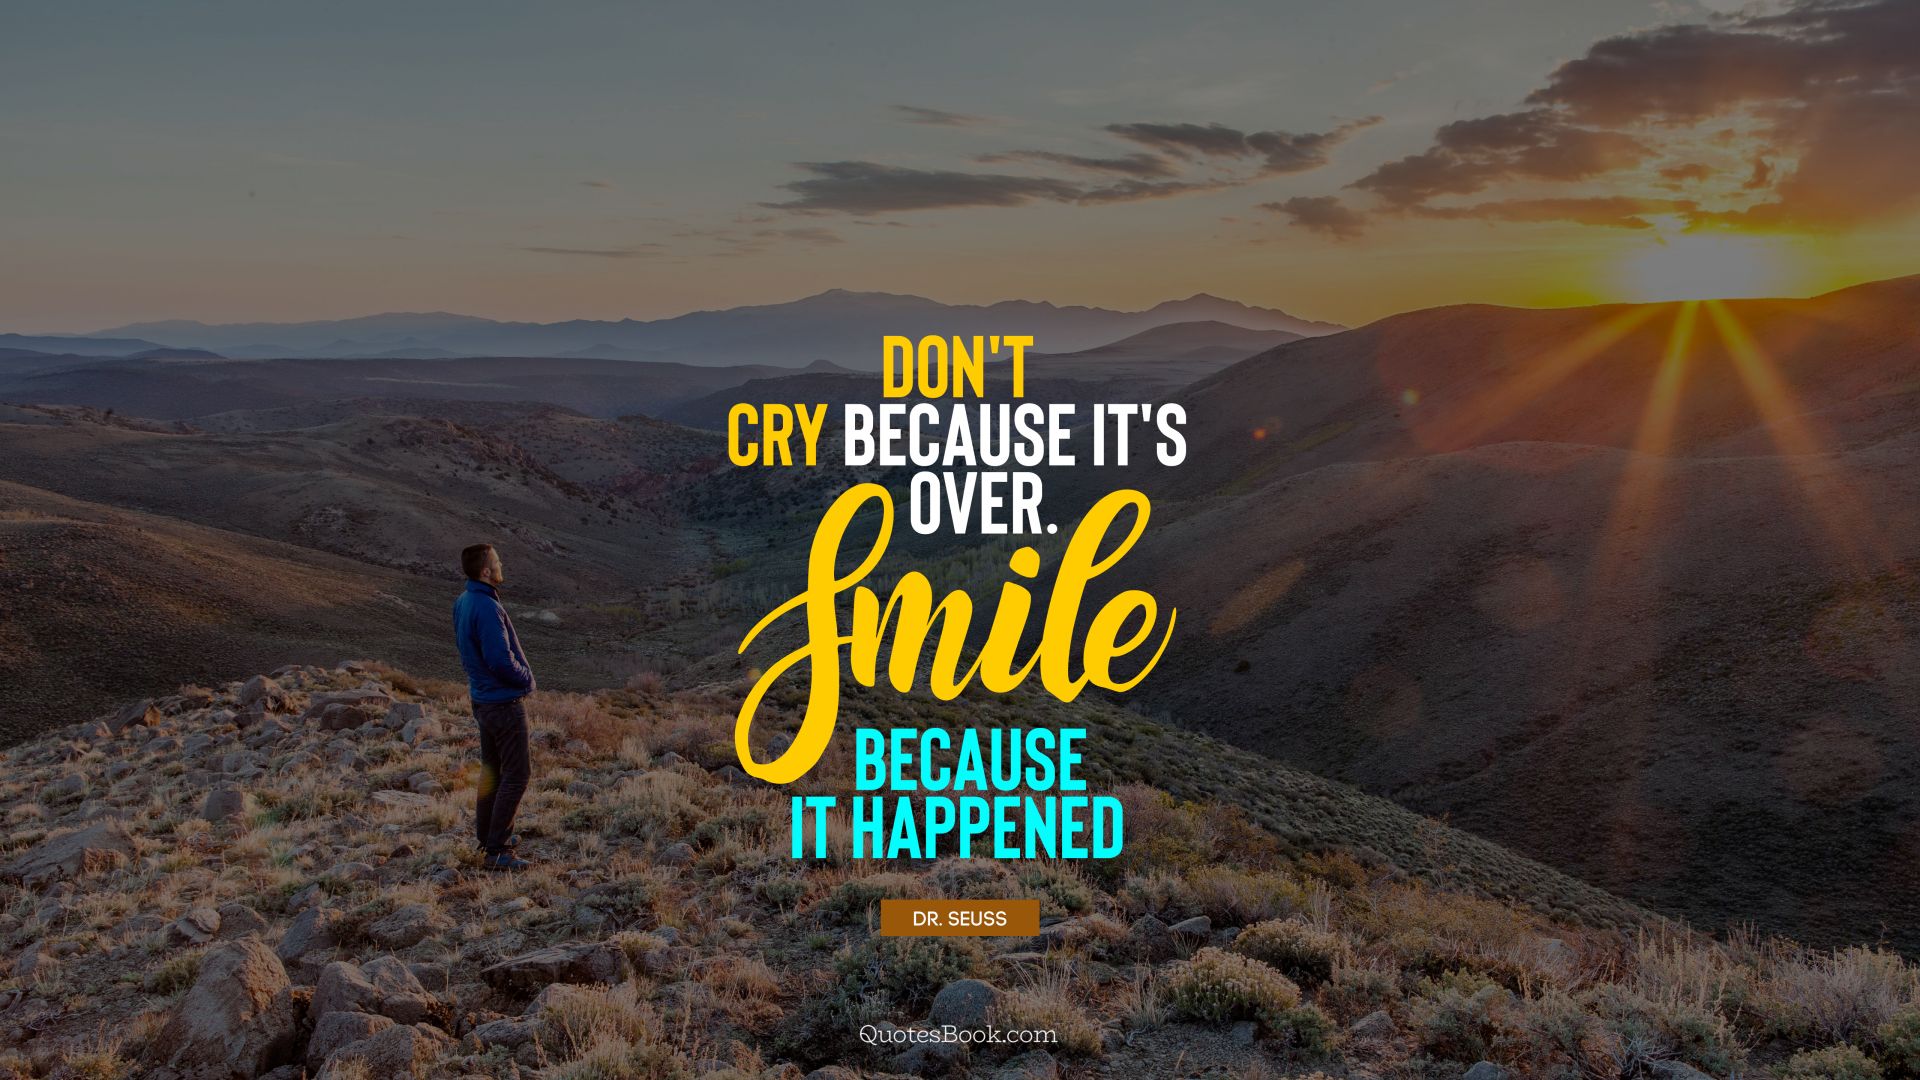 Don't cry because it's over. Smile because it happened. - Quote by Dr